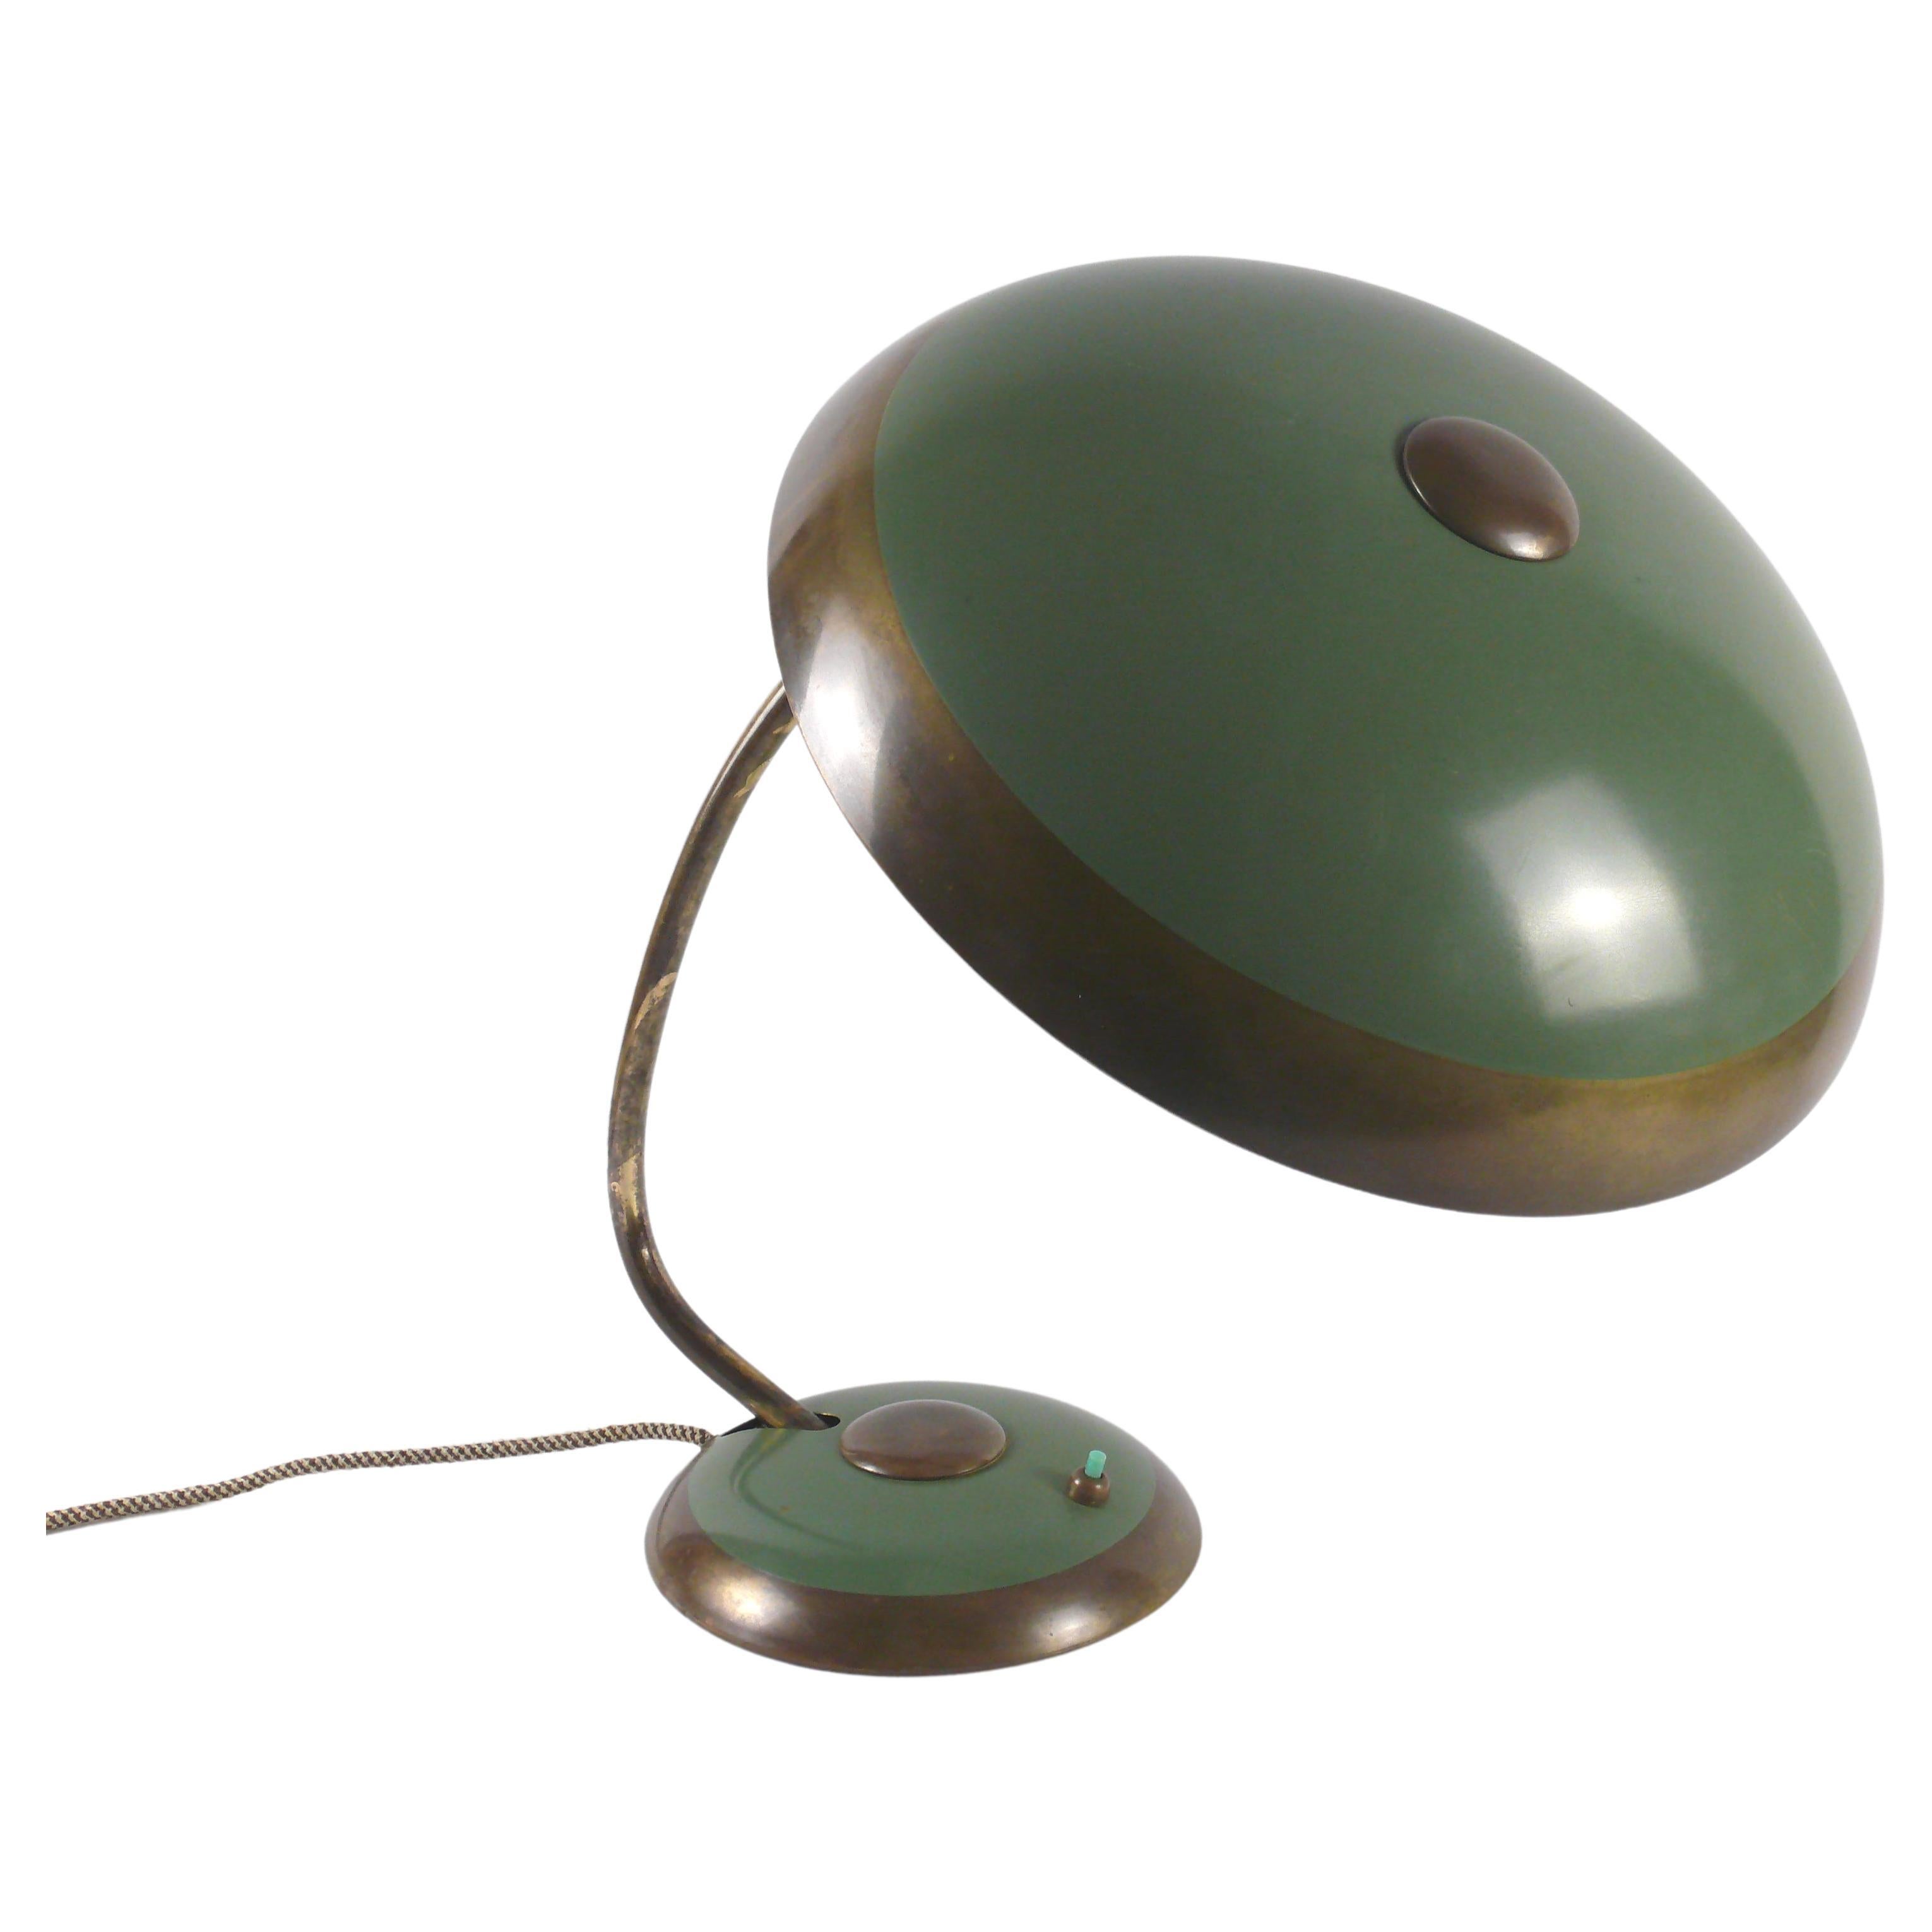 Helo Brass Table Lamp XL, Desk Lamp with Adjustable Shade, Germany, 1950s